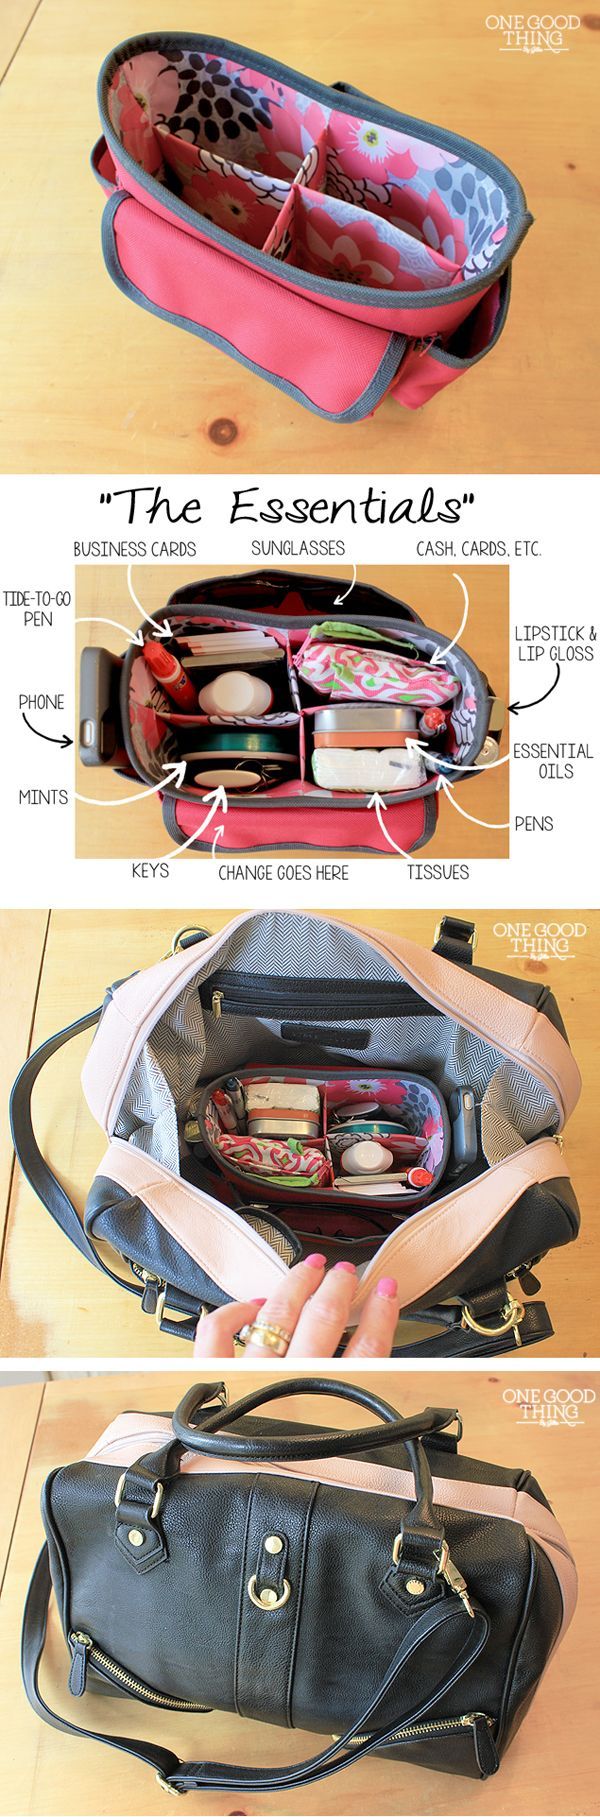 Use a craft store organizer to tidy up purse contents and make it easy to switch between bags – this one from Michaels for $9.99.